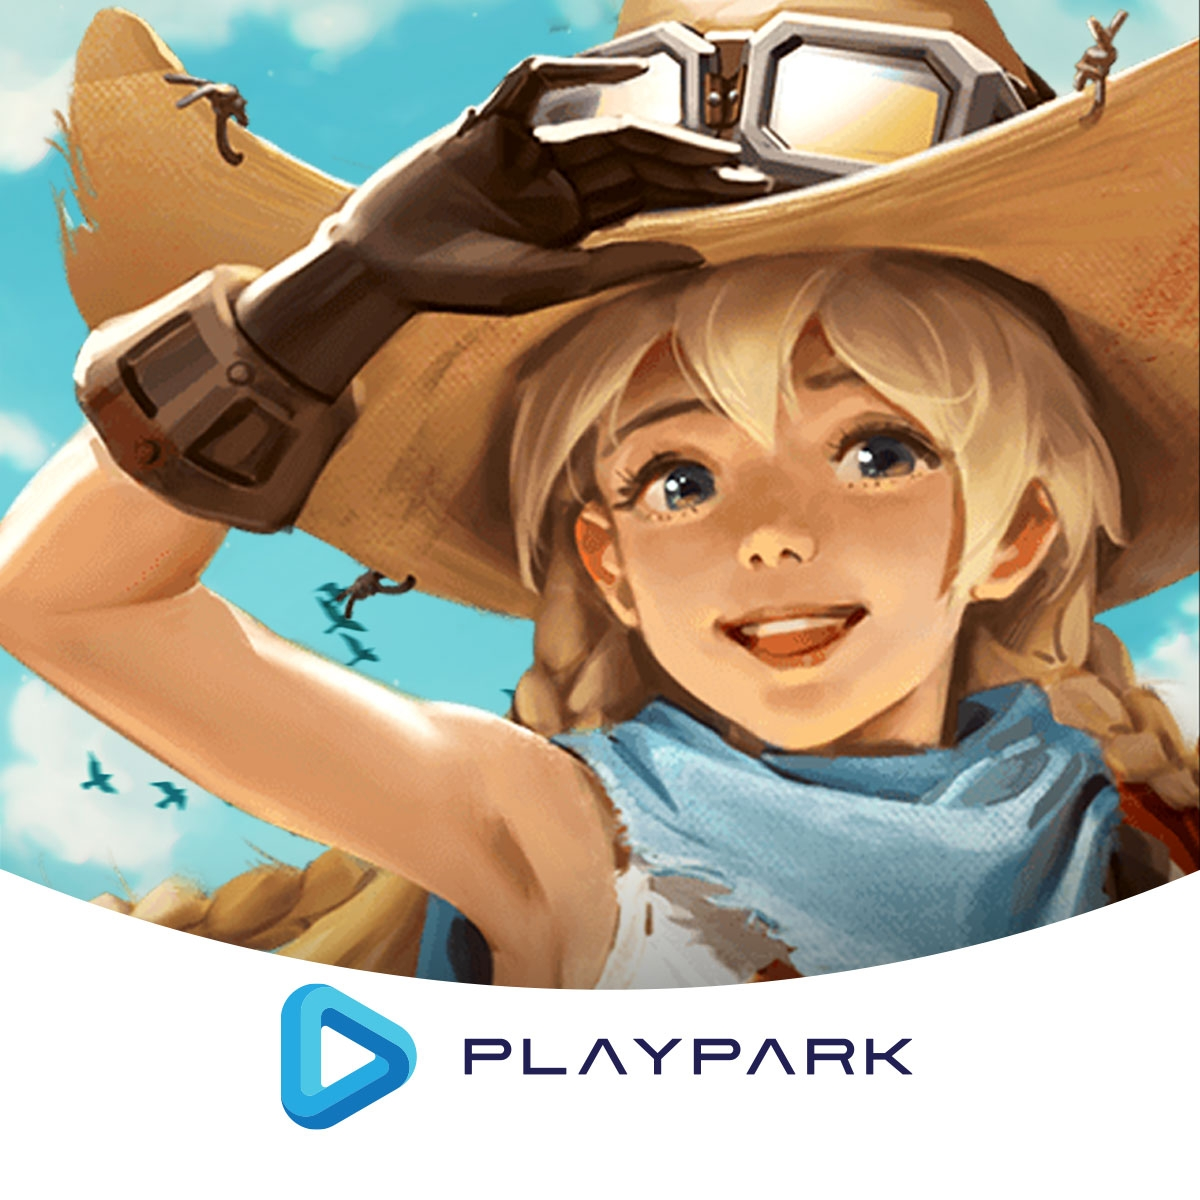 Latest Wandering Ark Playpark News and Guides